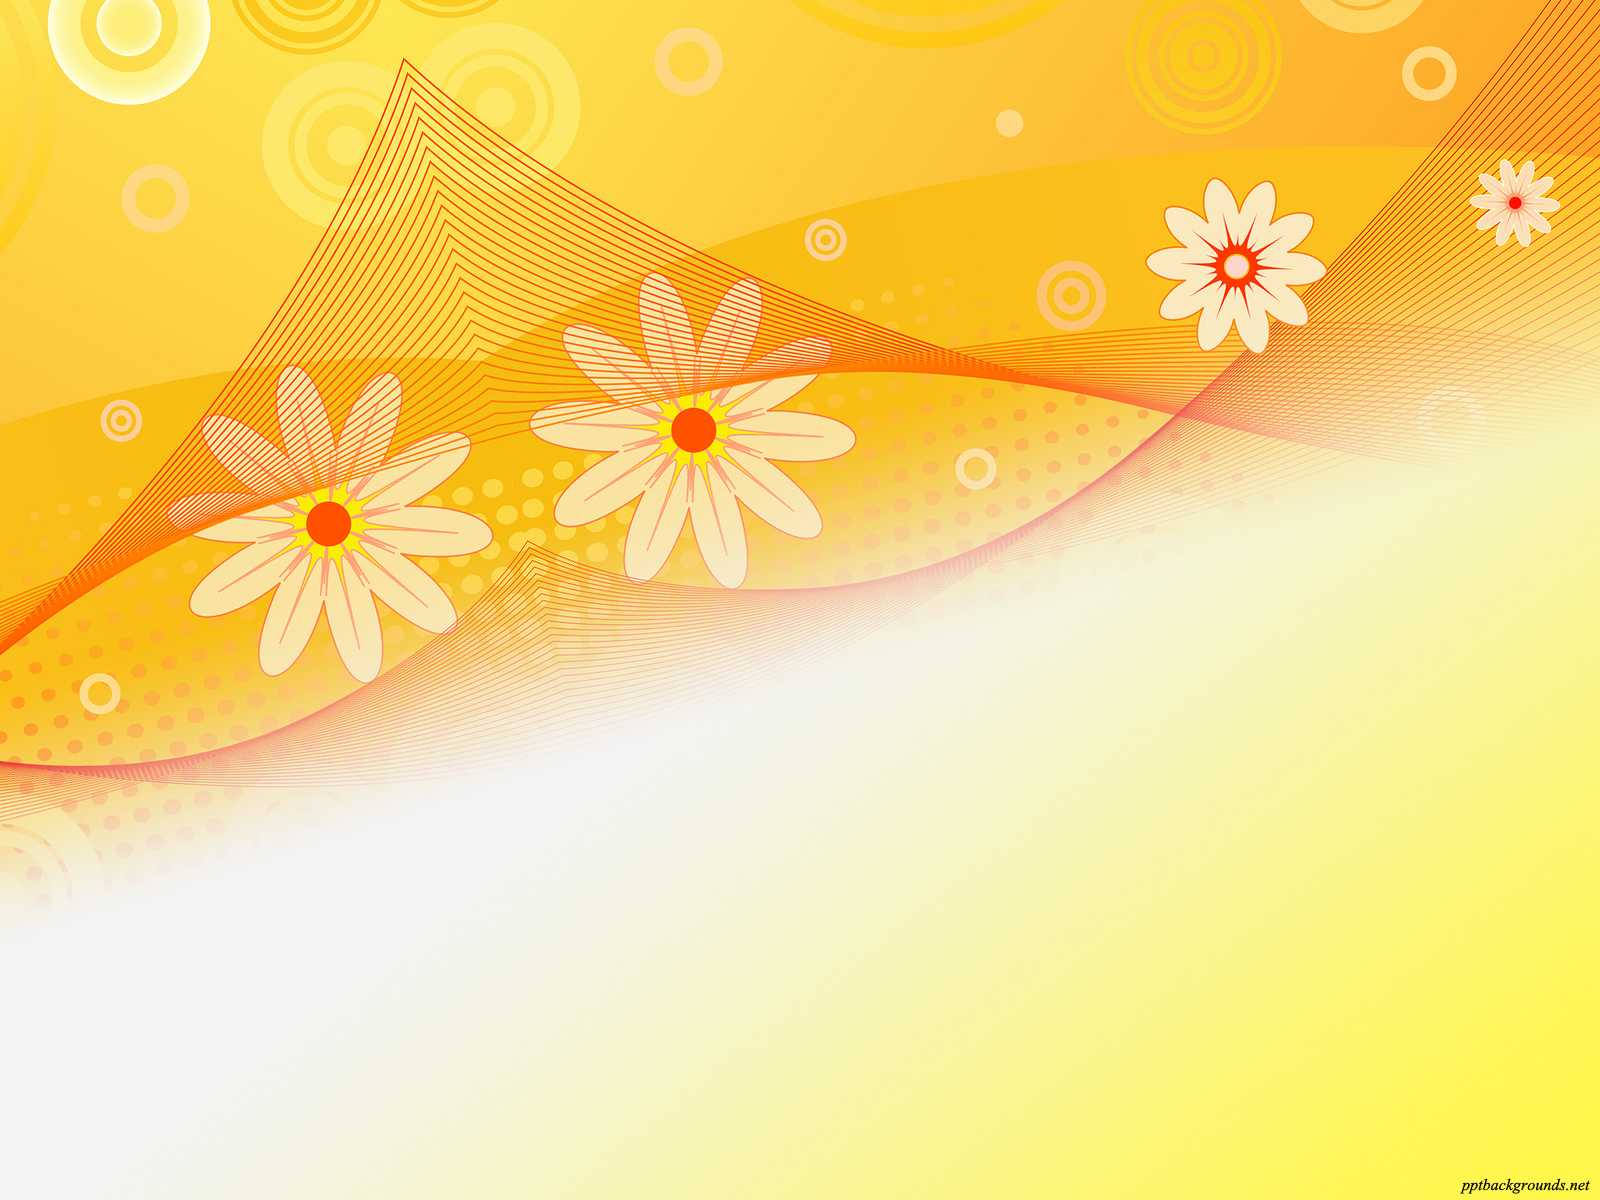 Sunflower Abstract Beauty Backgrounds For Powerpoint Inside Pretty Powerpoint Templates